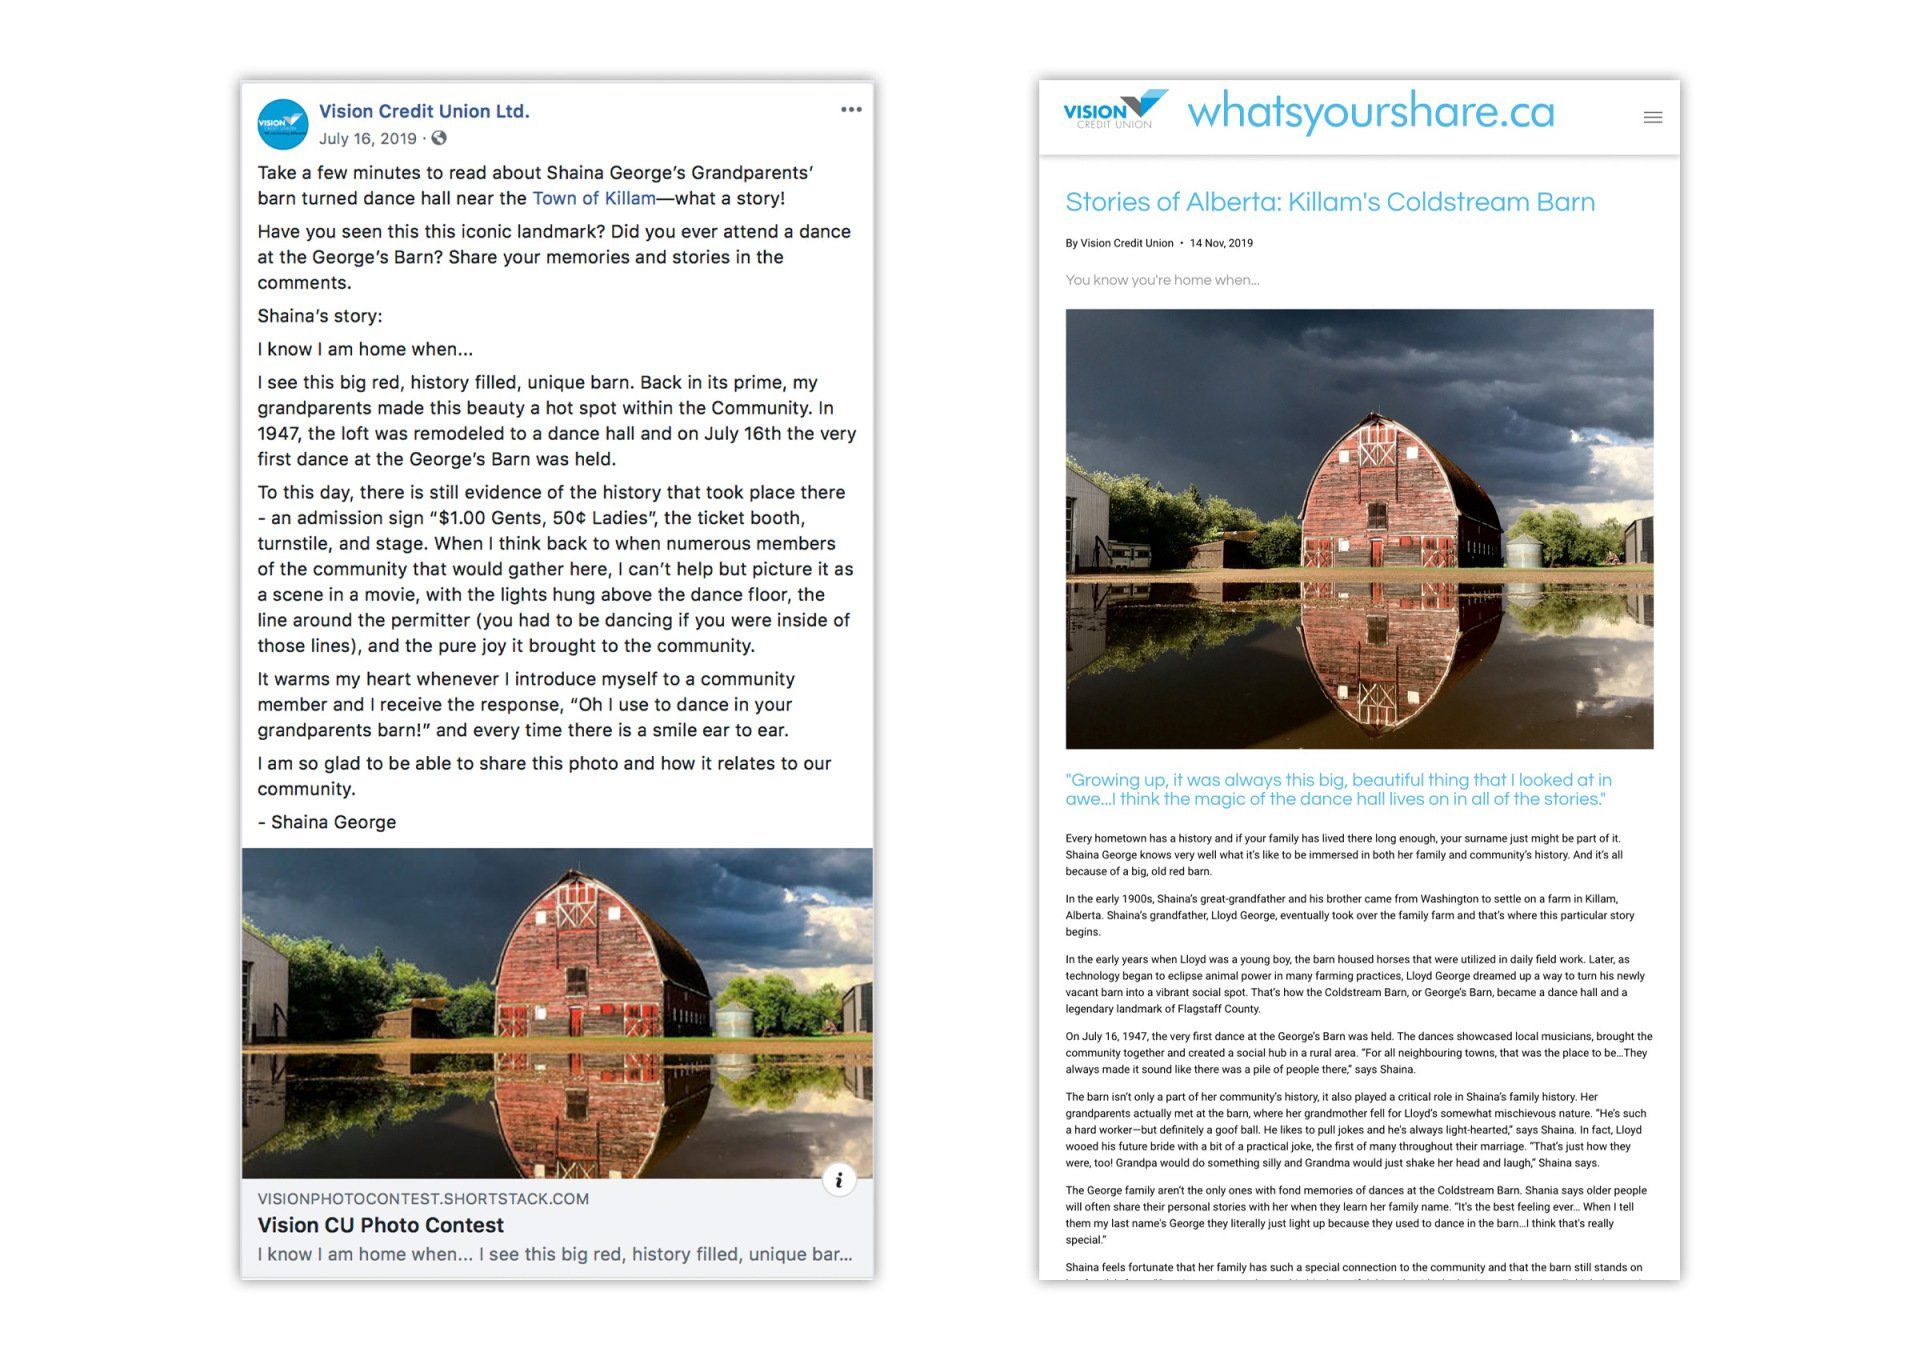 SERIES OF BLOG ARTICLES AND WRITING FOR VISION CREDIT UNION BY IVY DESIGN INC